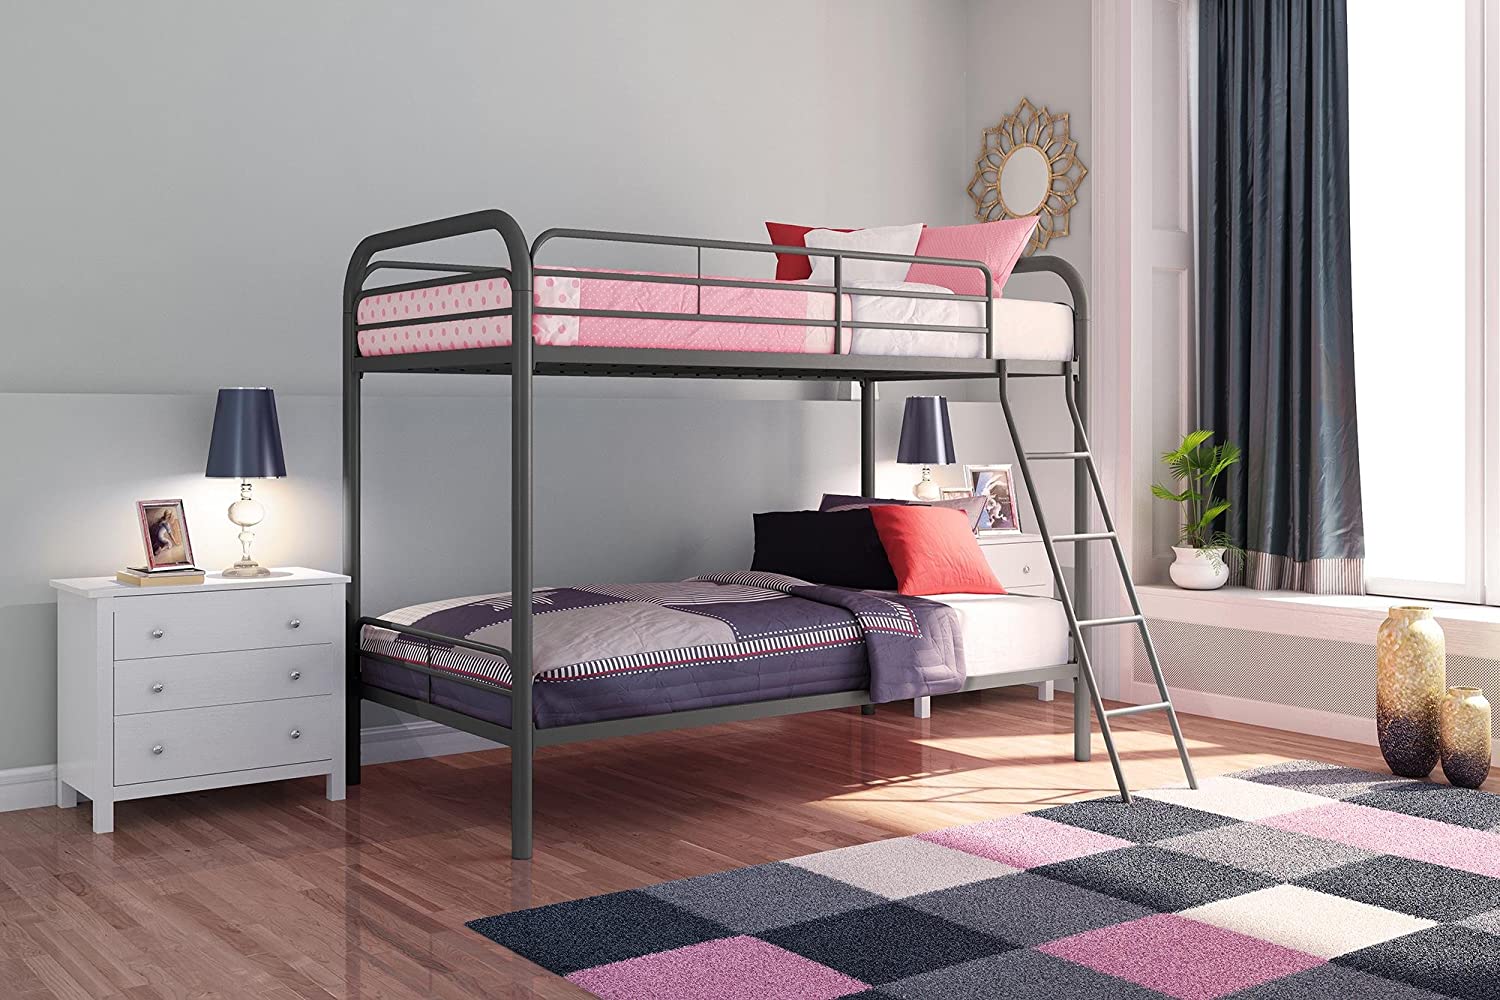 7 Best Kids Bunk Beds Under $200 2023 - Buying Guide 1